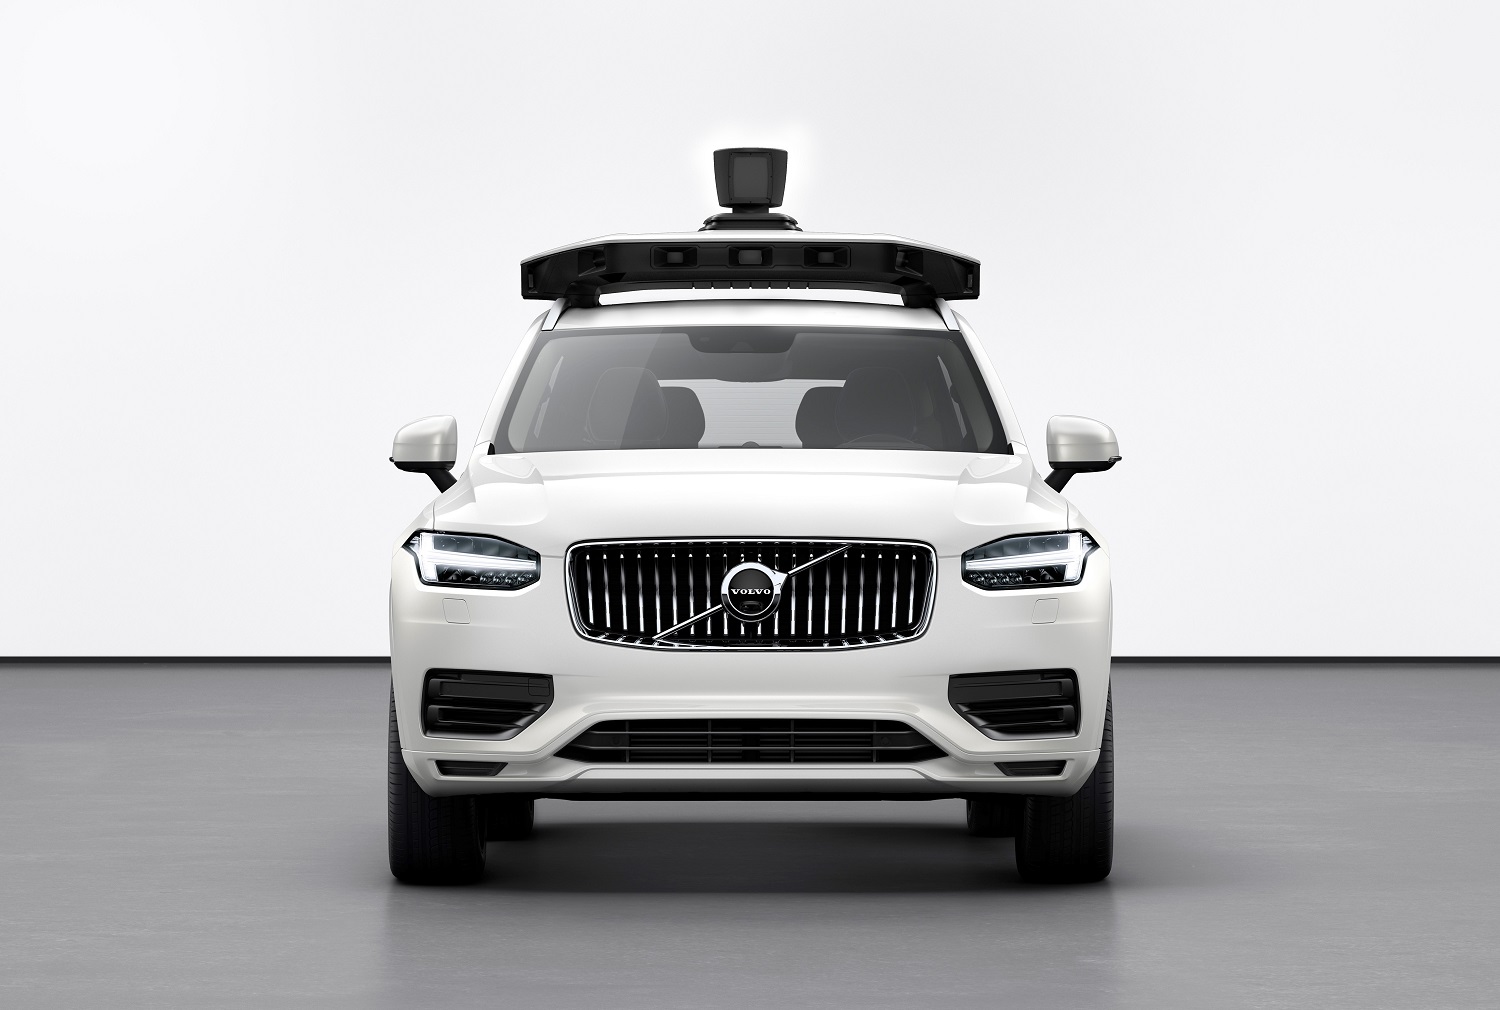 volvo uber unveil xc90 based self driving car prototype cars and present production vehicle ready for